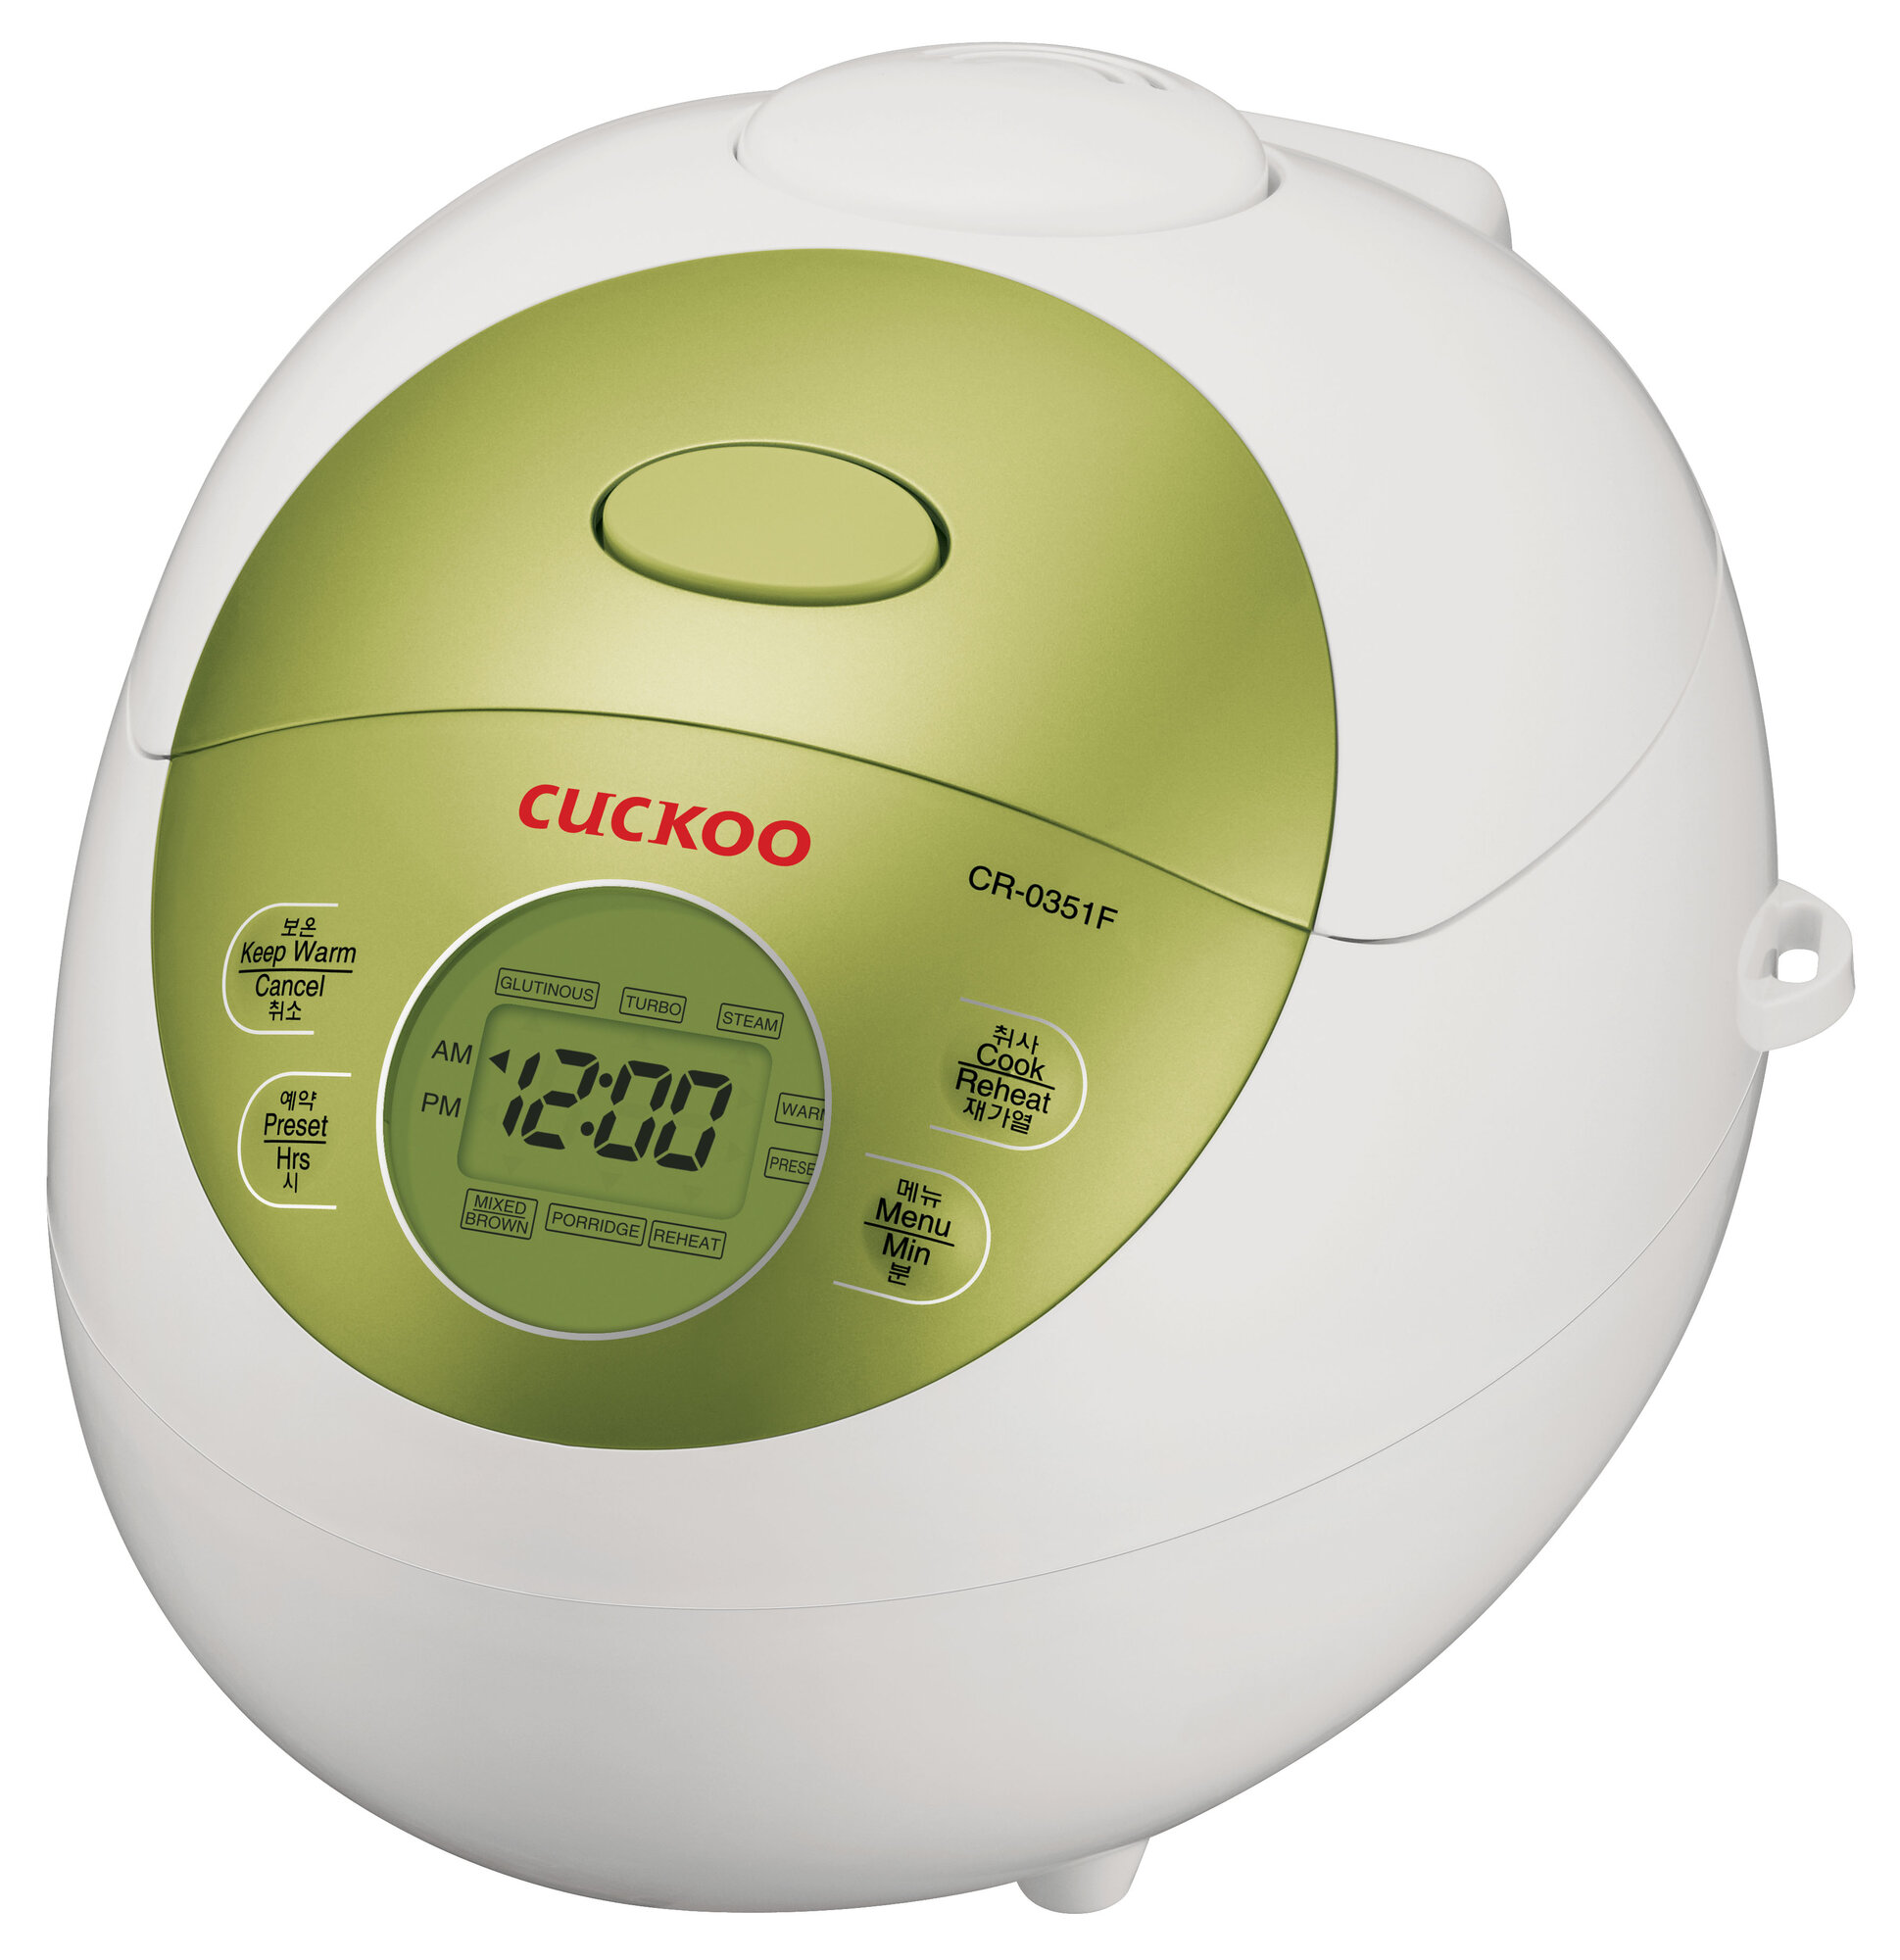 Cuckoo Electronics 3-Cup Electric Rice Cooker | eBay